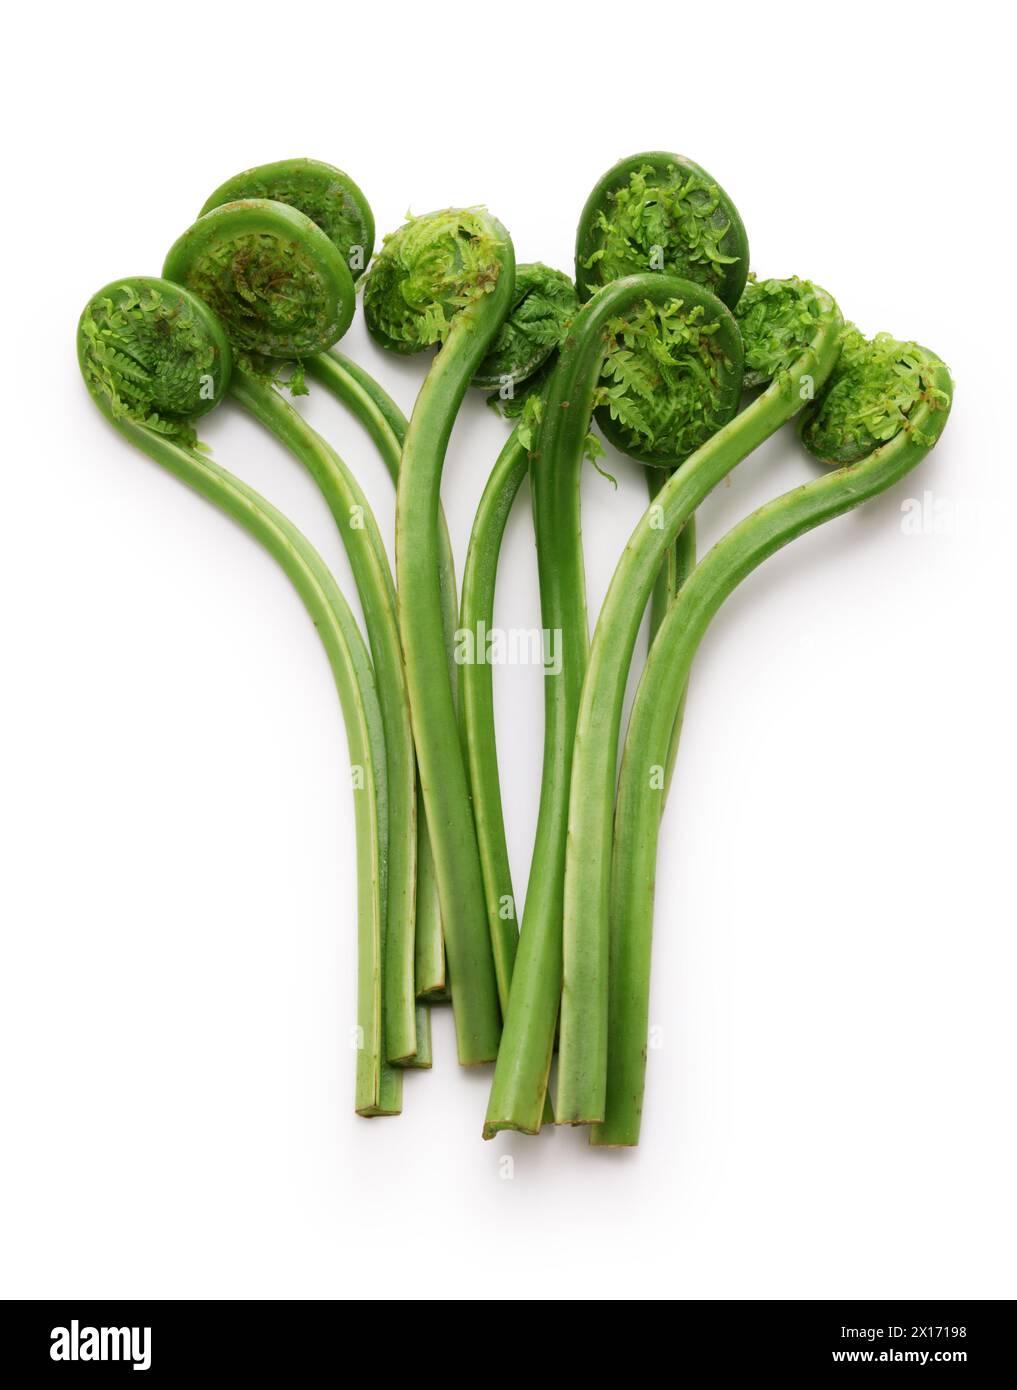 fiddlehead (Ostrich fern), Japanese delicious wild vegetables isolated on white background Stock Photo